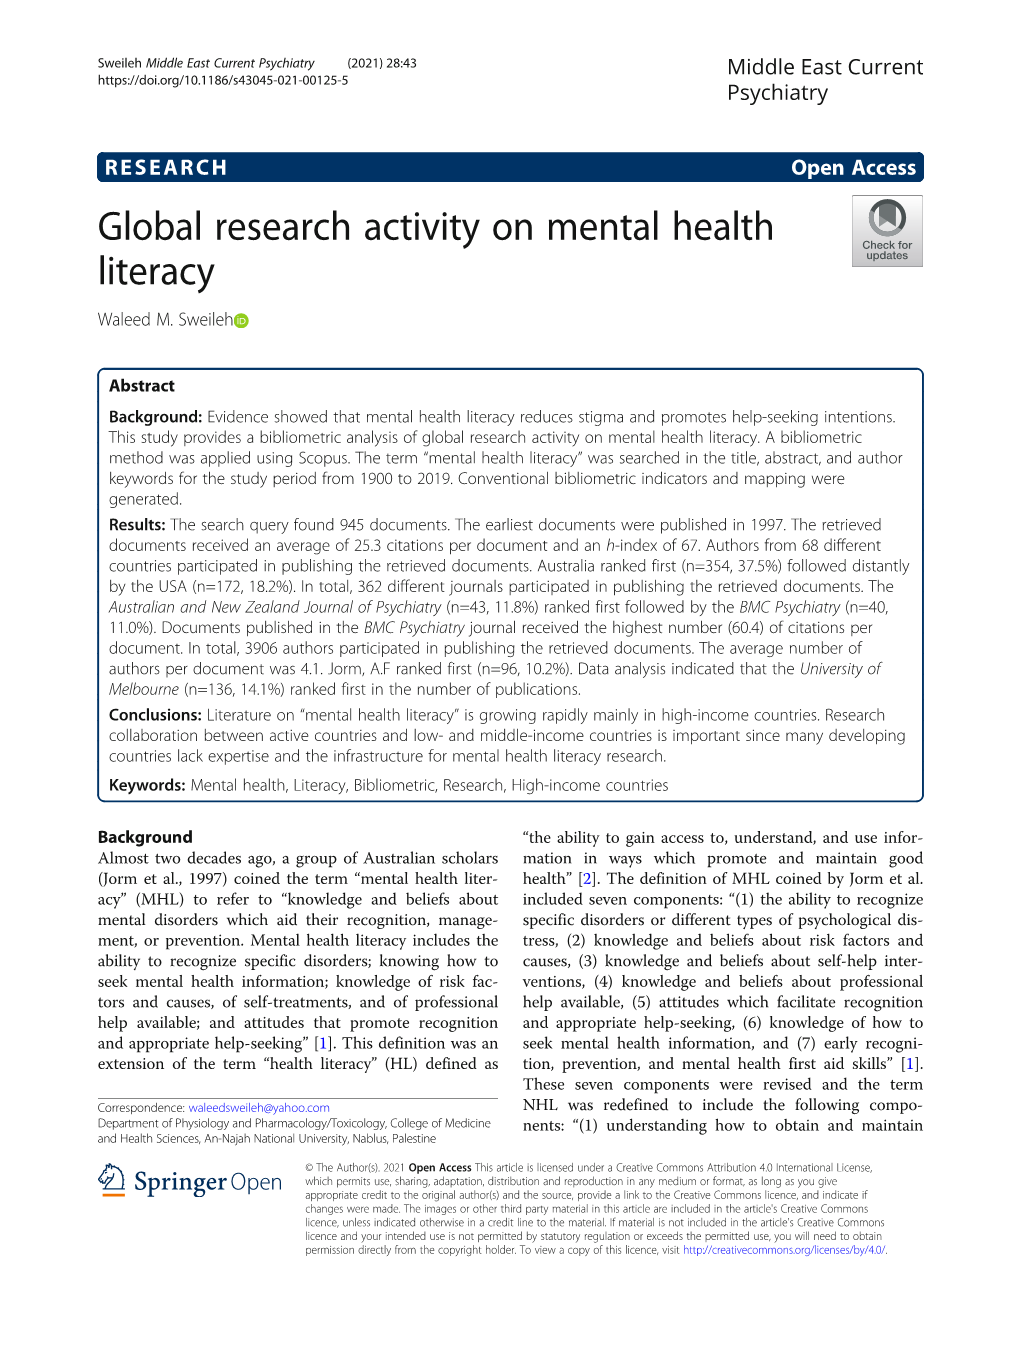 Global Research Activity on Mental Health Literacy Waleed M